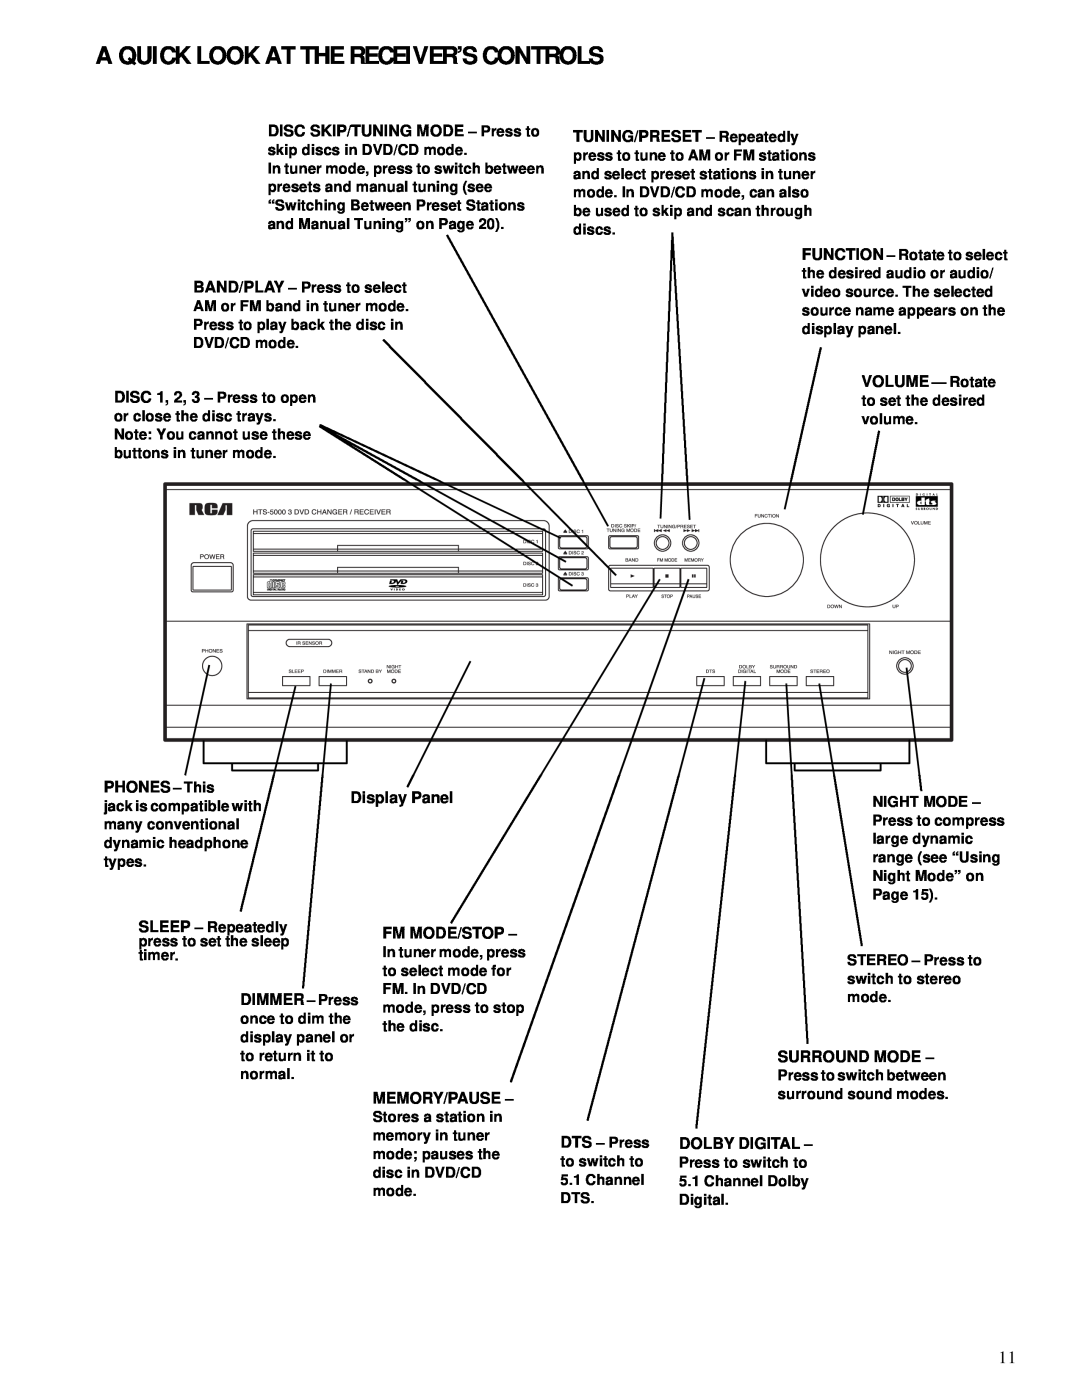 RCA 600-Watt manual A Quick Look At The Receiver’S Controls, DISC SKIP/TUNING MODE - Press to, PHONES - This, Display Panel 